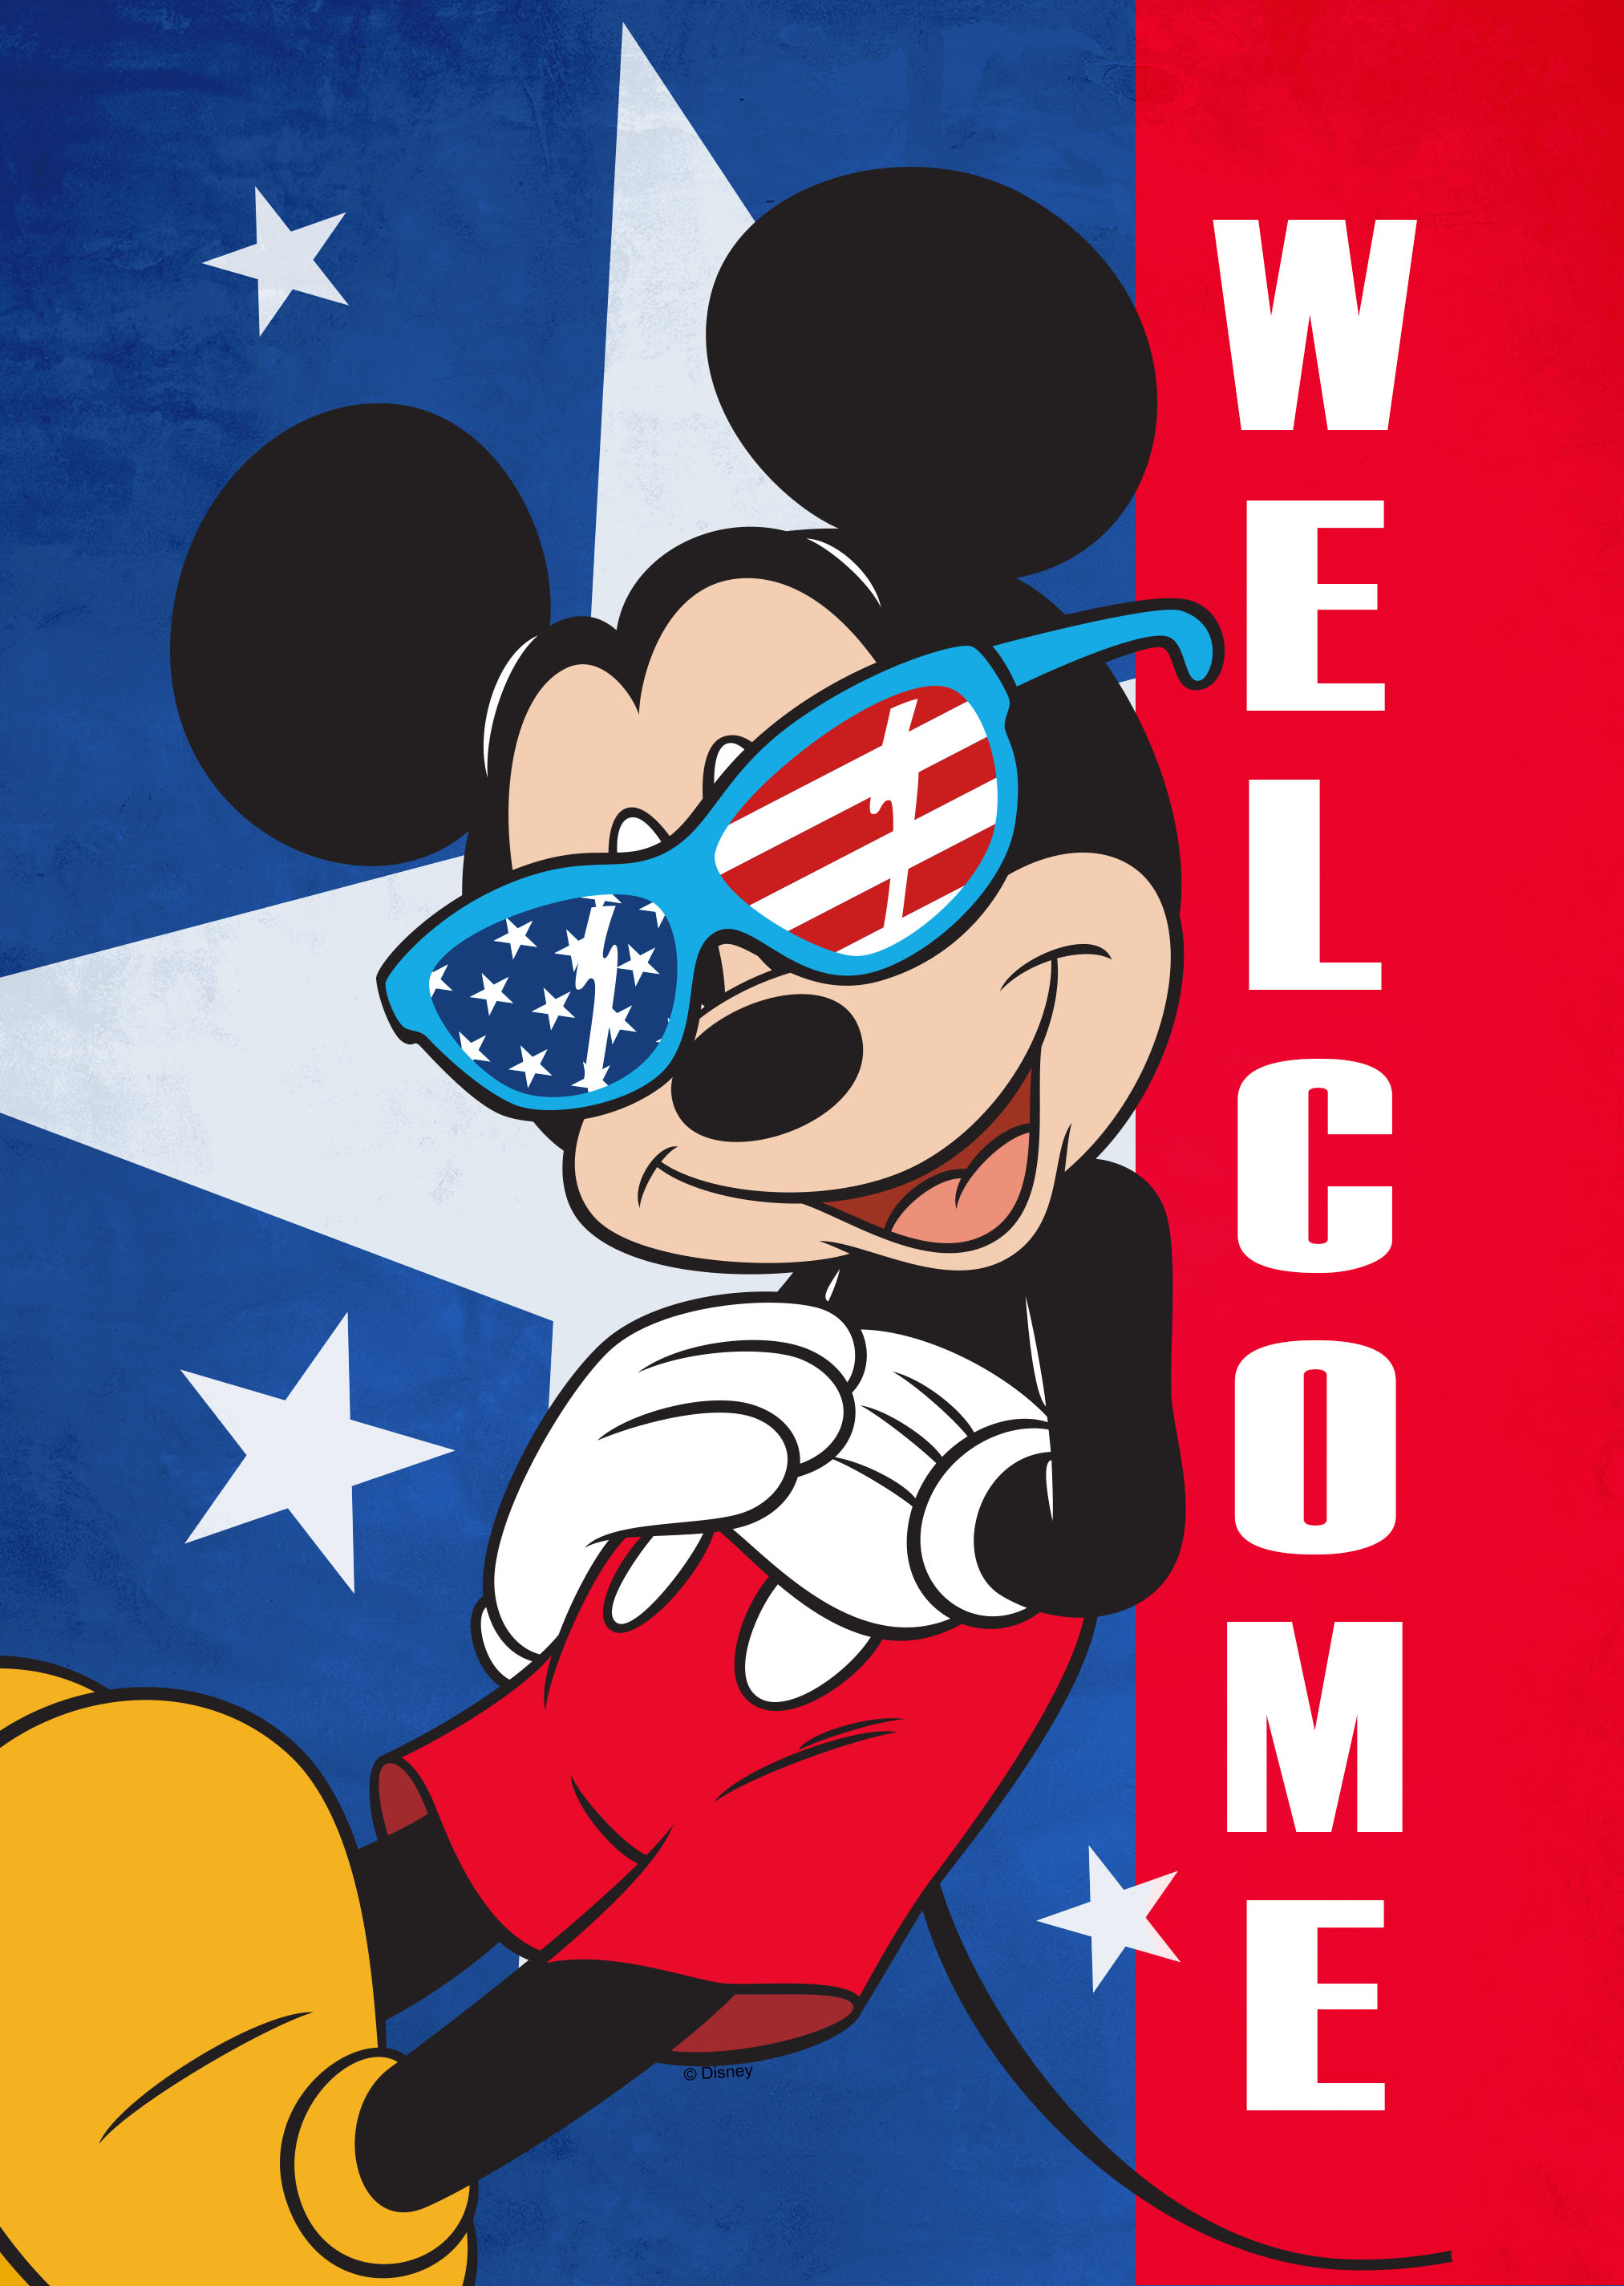 DISNEY Welcome Garden Flag Banner Mickey Mouse USA AMERICAN FLAG 4TH OF JULY 